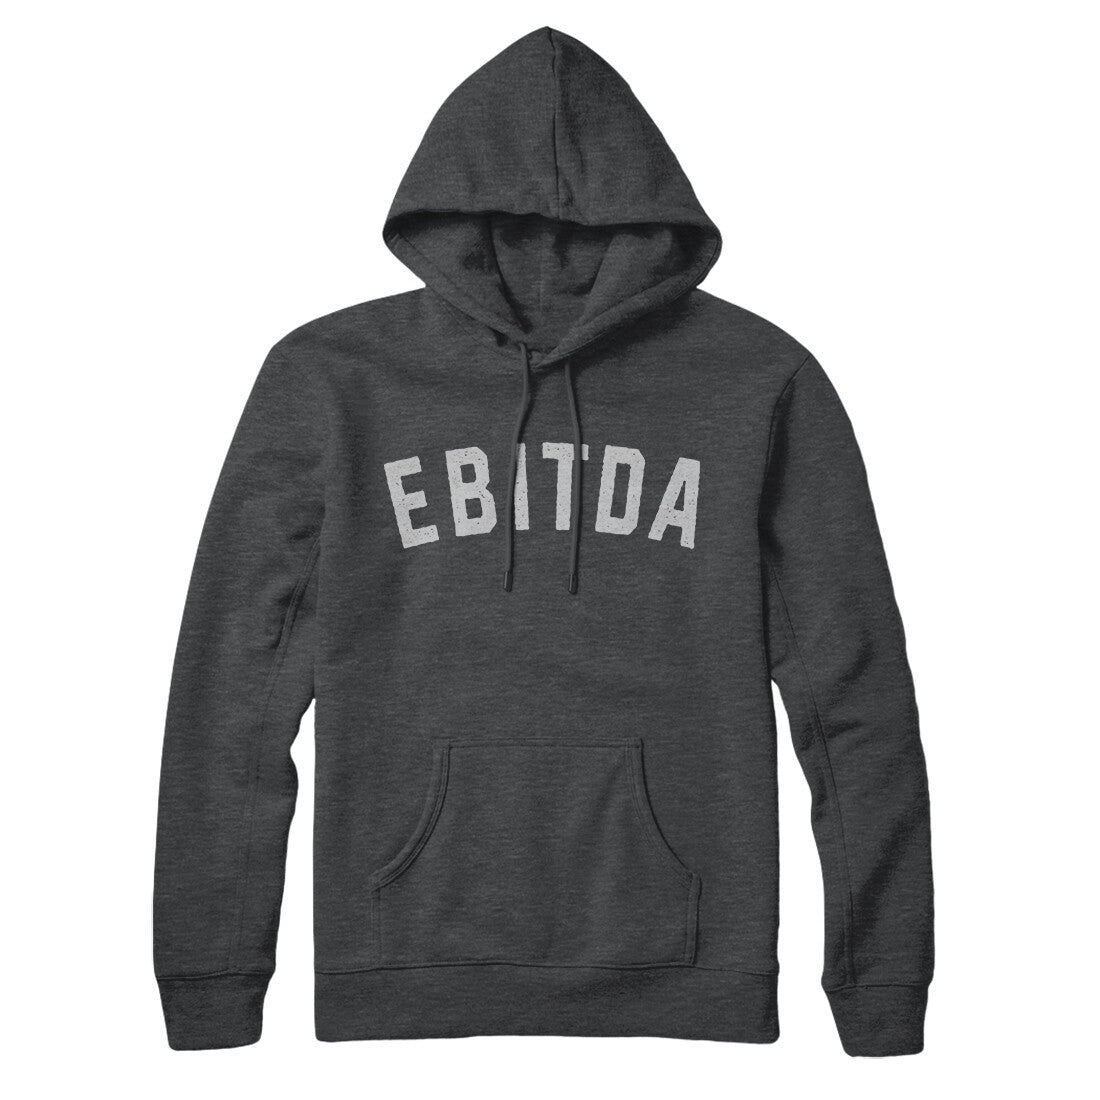 EBITDA in Charcoal Heather Color